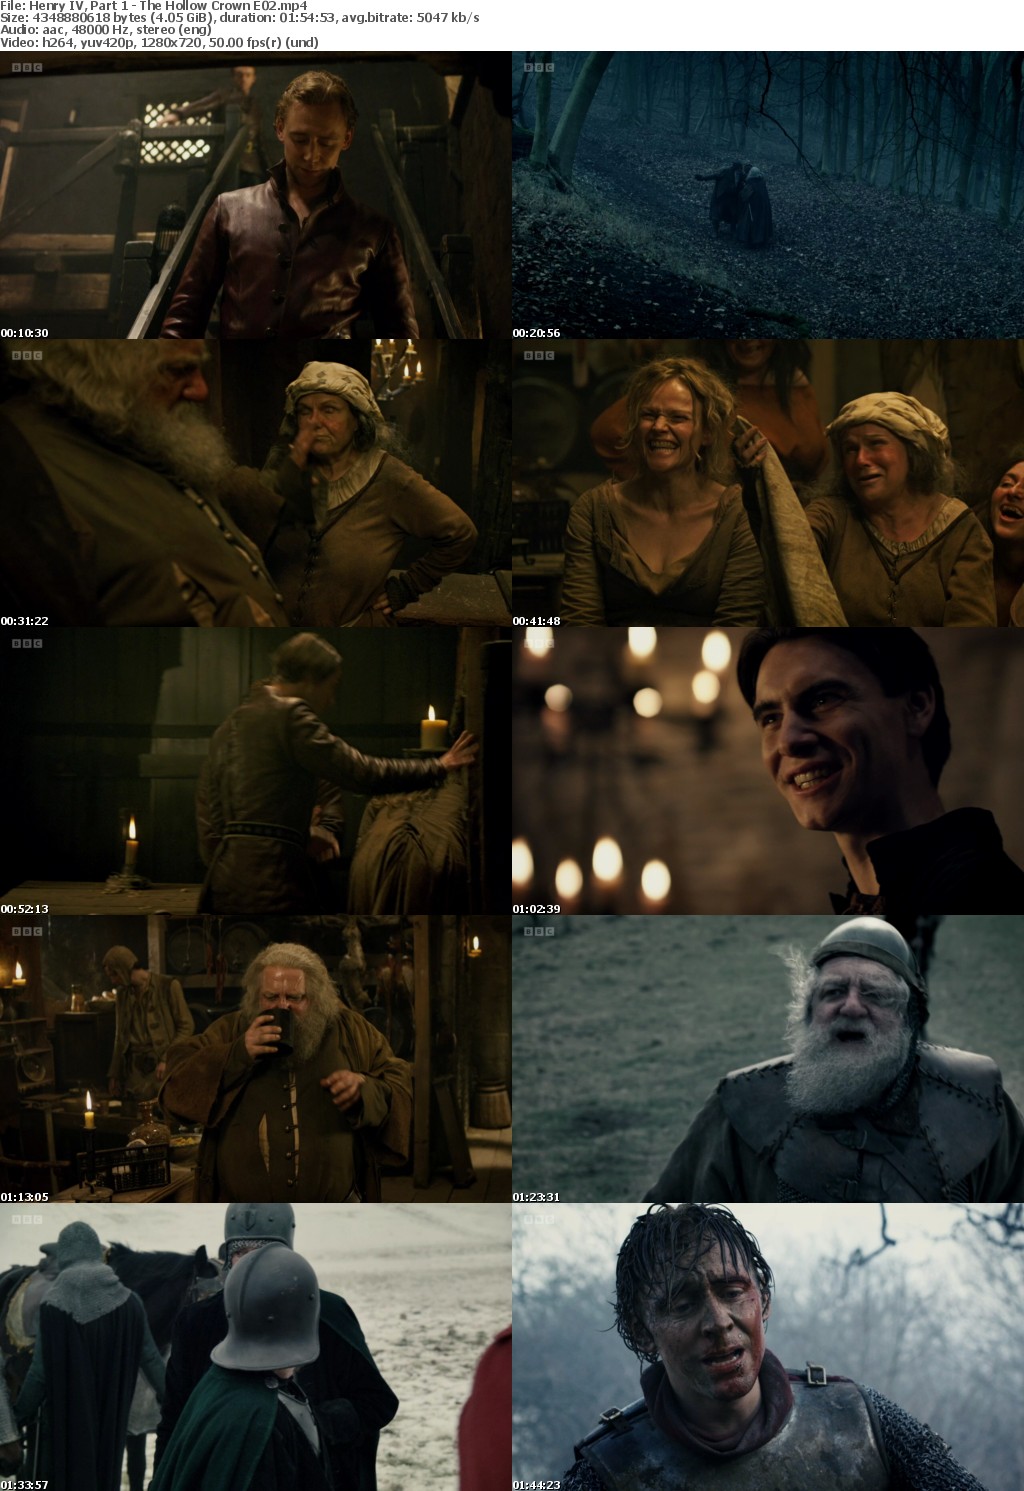 Henry IV, Part 1 - The Hollow Crown E02 (Irons, Hiddlestone, Peake) (1280x720p HD, 50fps, soft Eng subs)